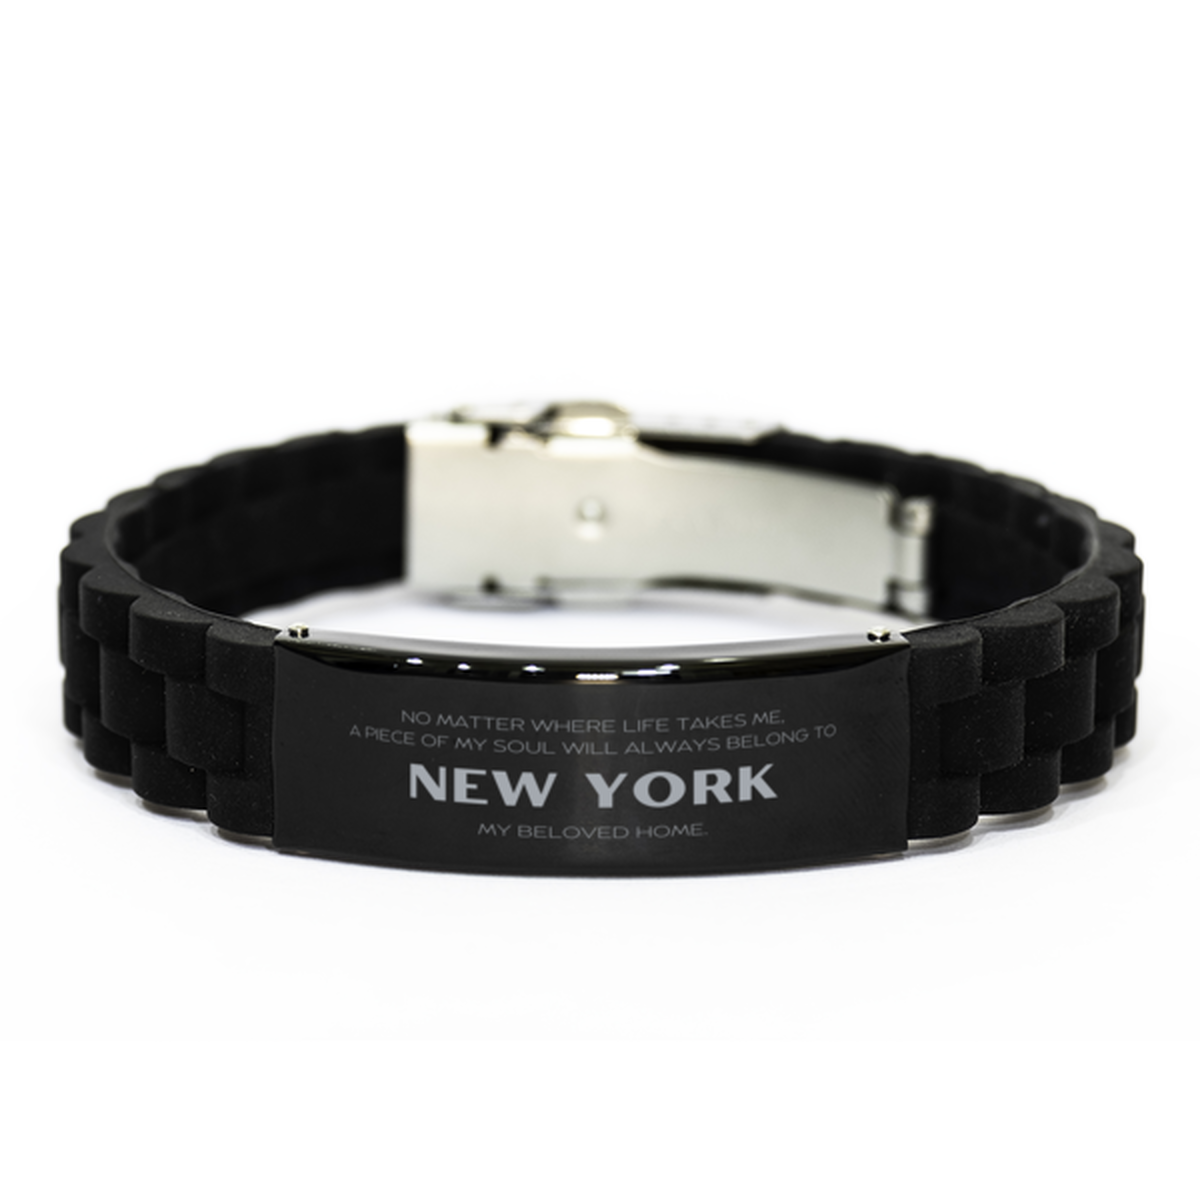 Love New York State Gifts, My soul will always belong to New York, Proud Black Glidelock Clasp Bracelet, Birthday Unique Gifts For New York Men, Women, Friends